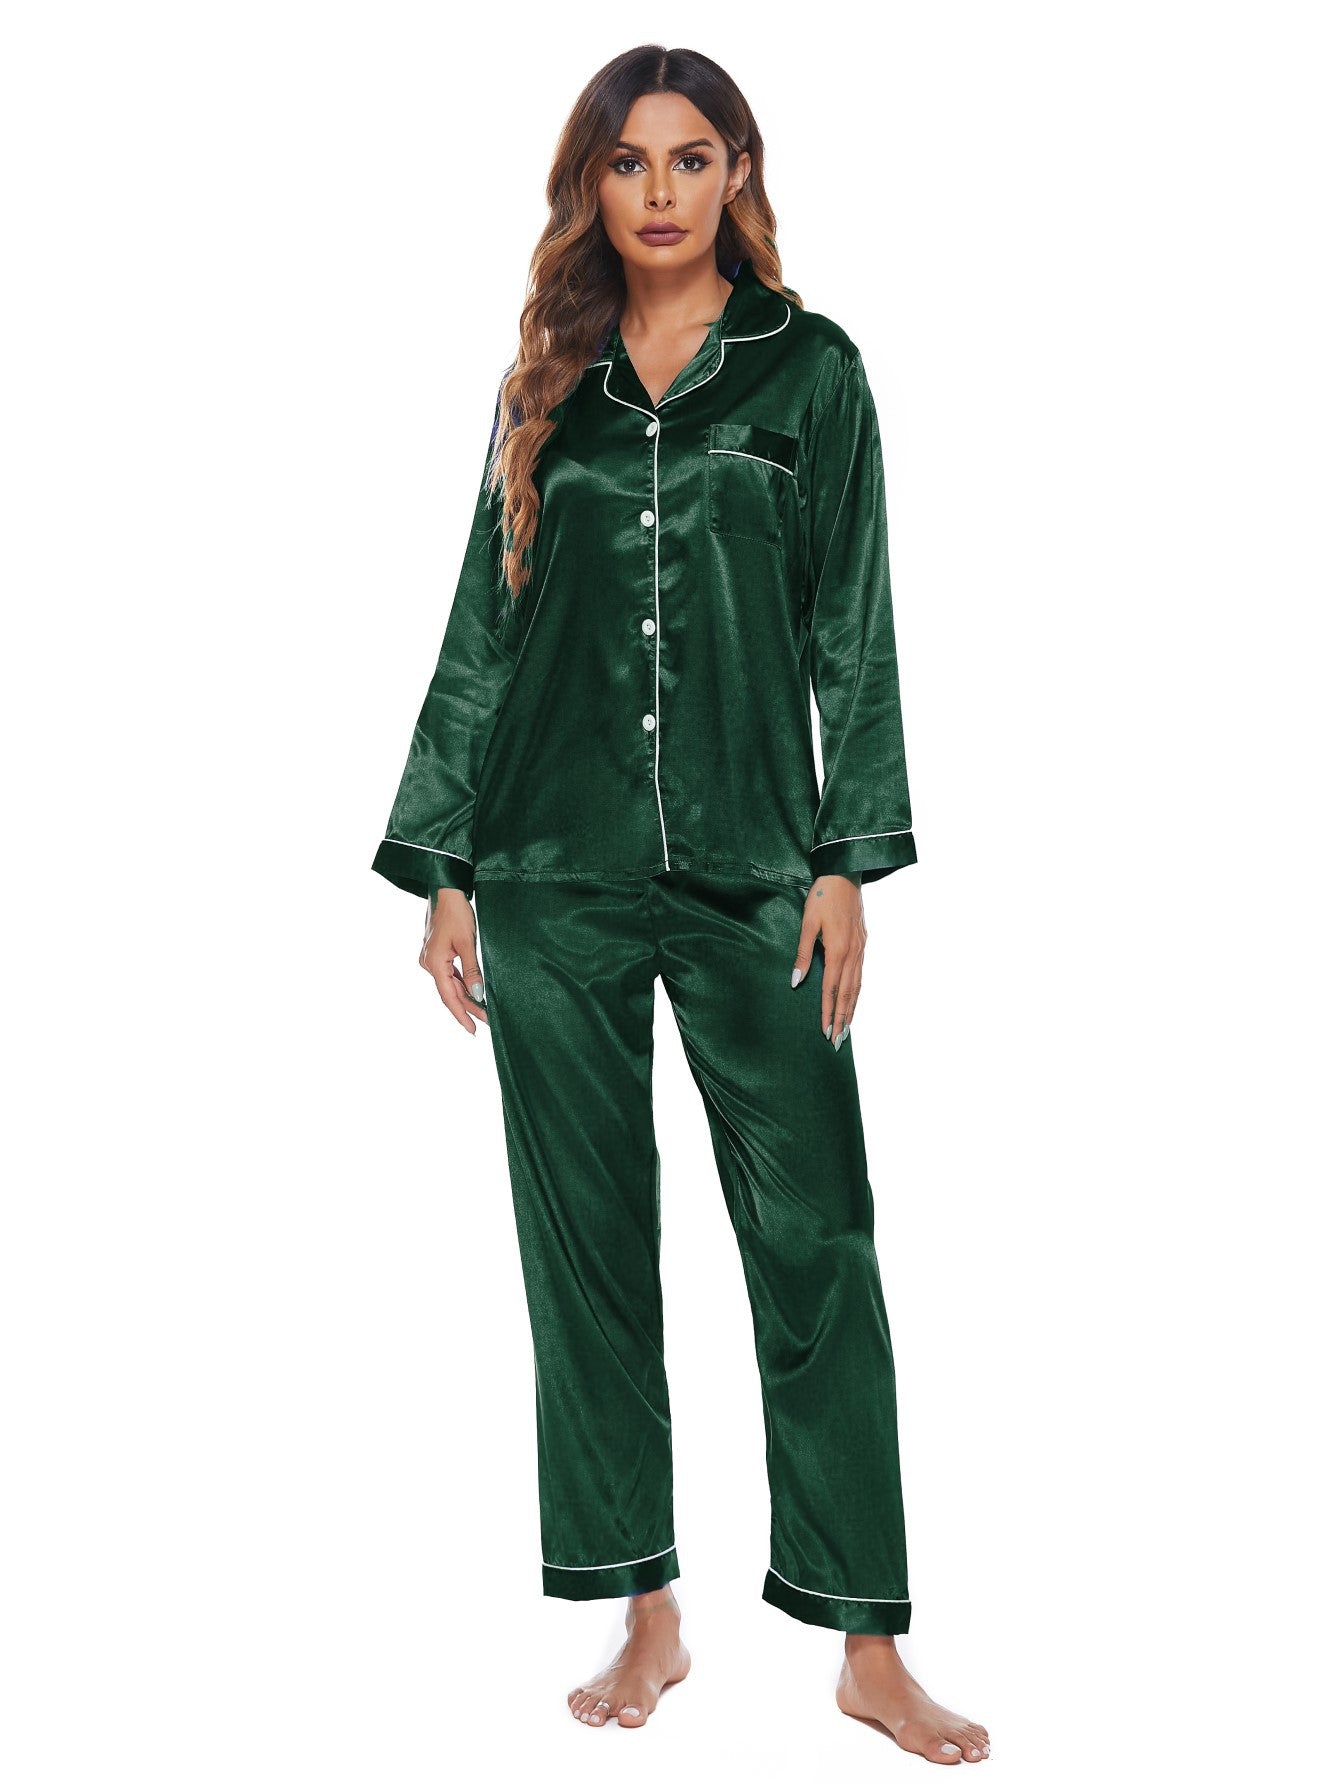 NightSuits  | Women's Long Sleeve Soft and comfortable Night suit | thecurvestory.myshopify.com